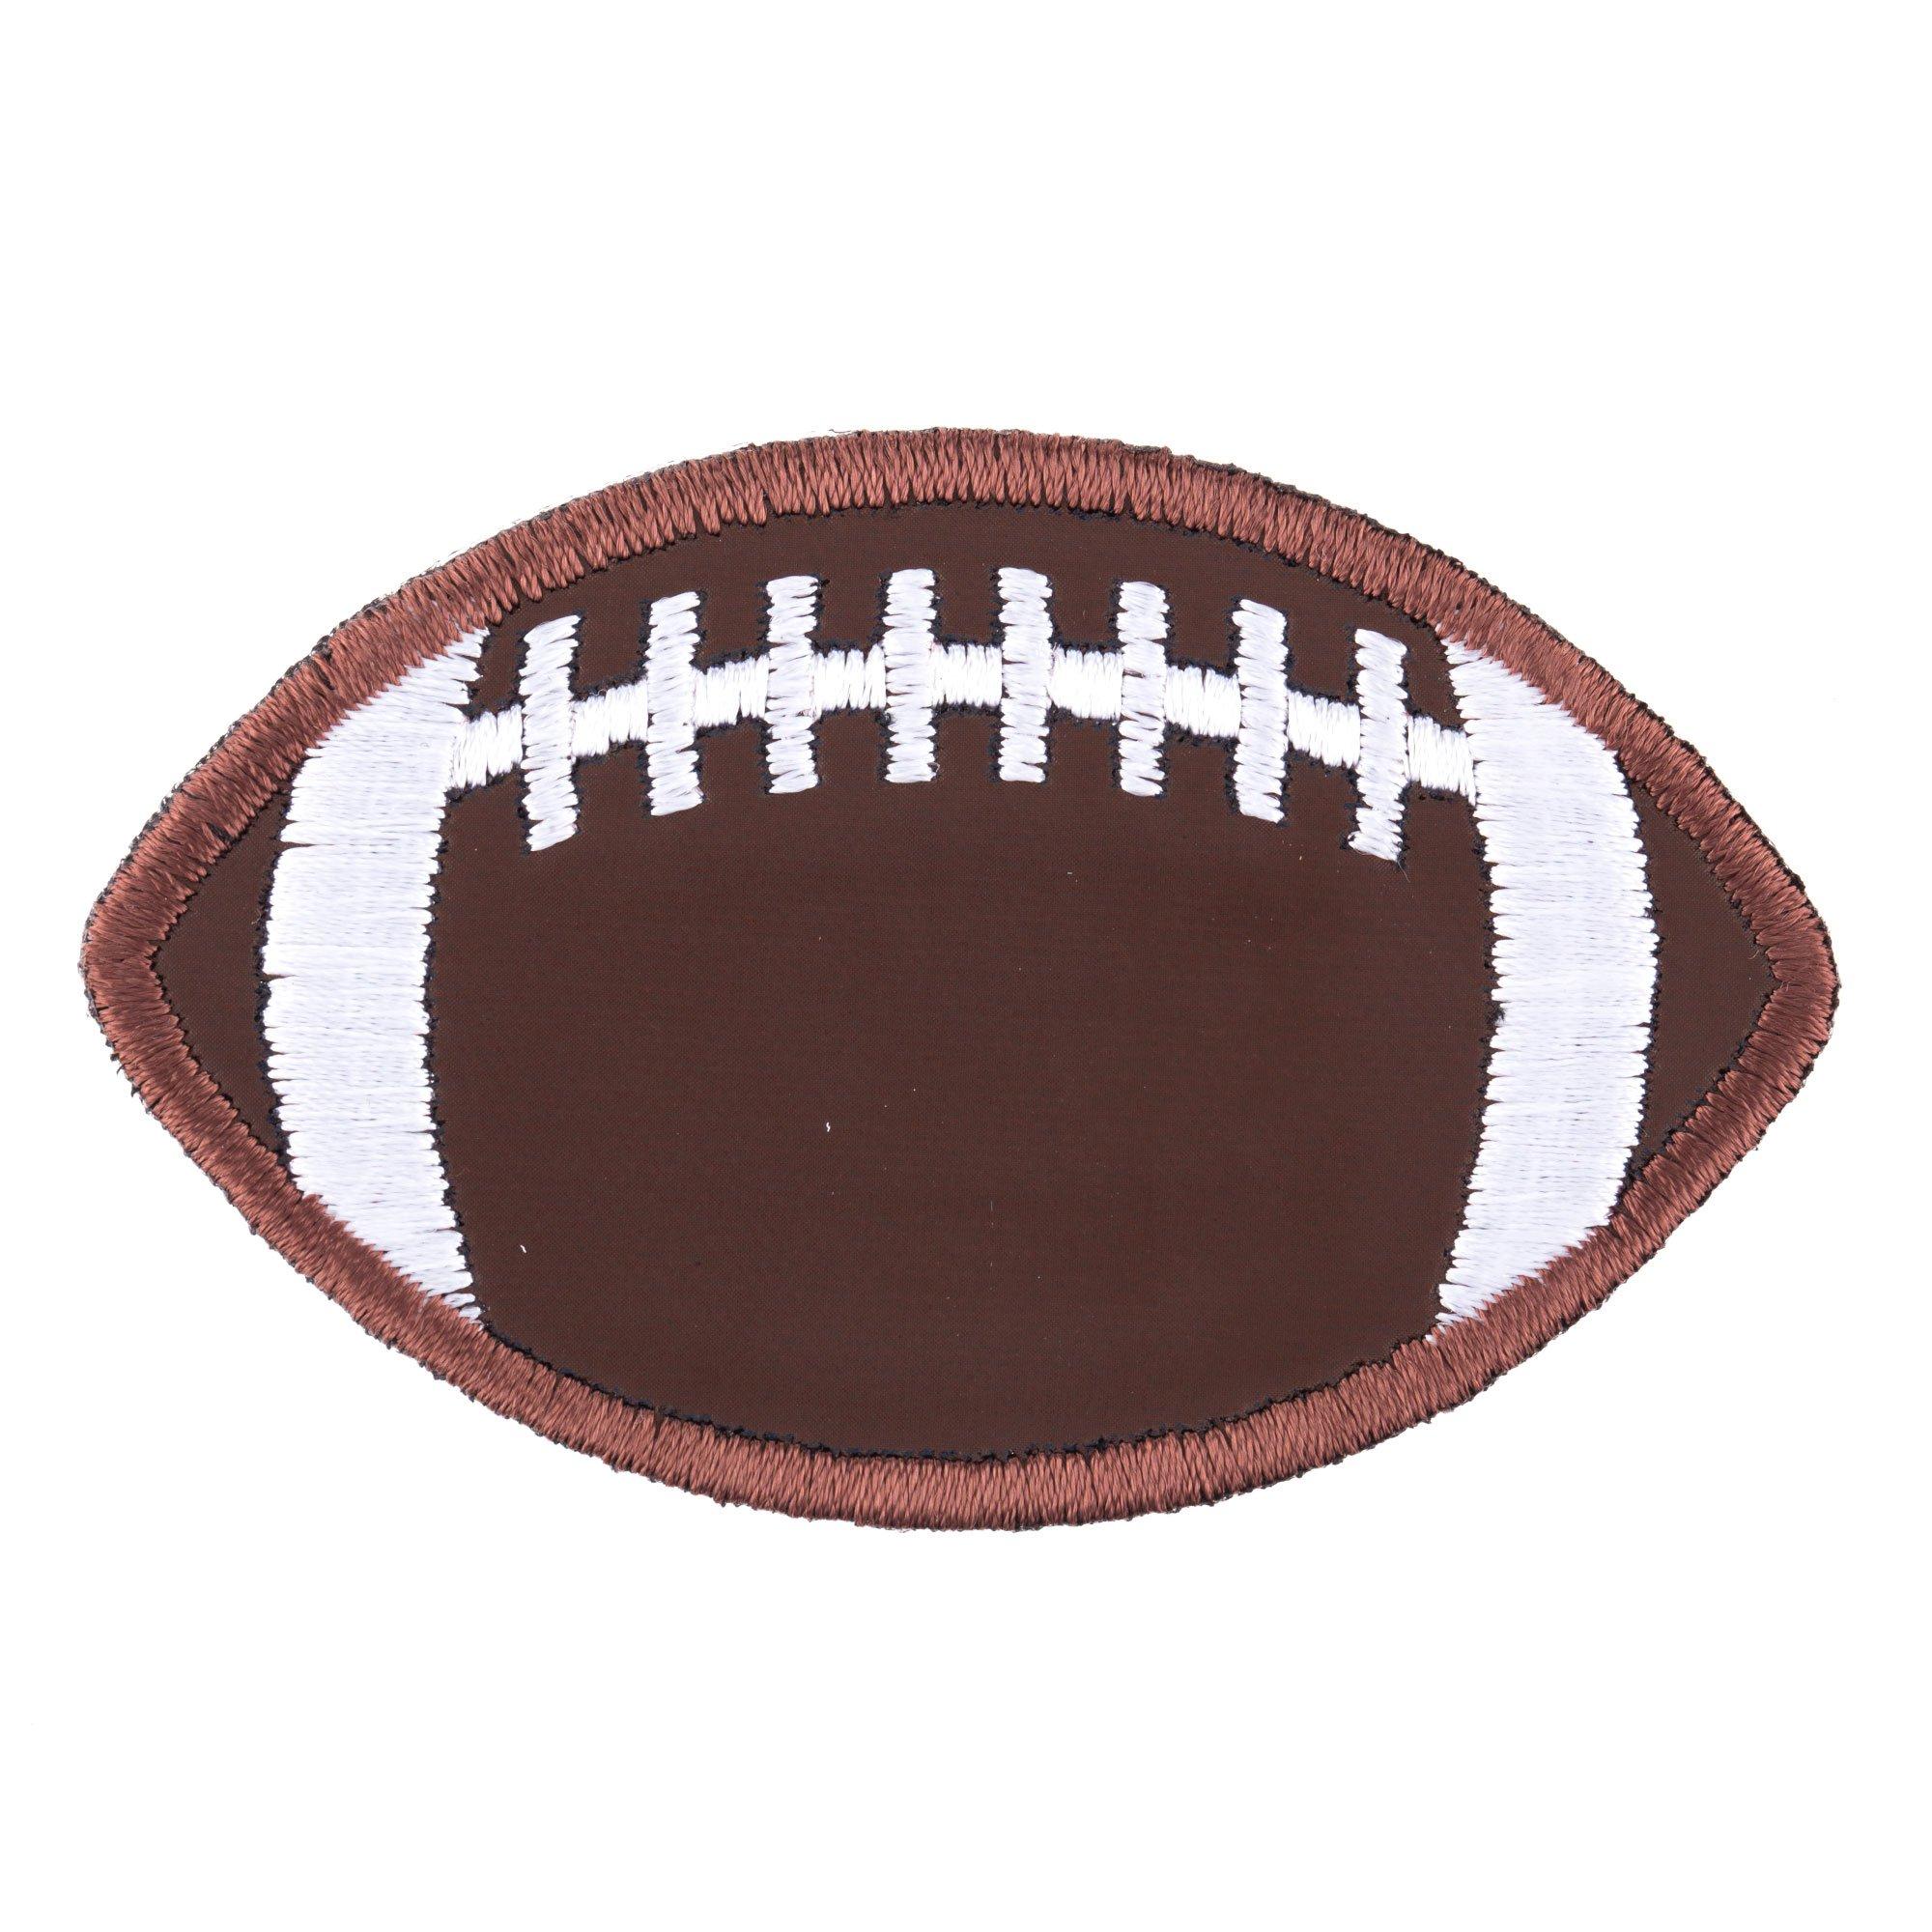 12pcs 40mm Round Football Soccer Patches Iron On Sewing Embroidery Badge  Sticker For DIY Clothes And Decoration Garment Fabric Appliques